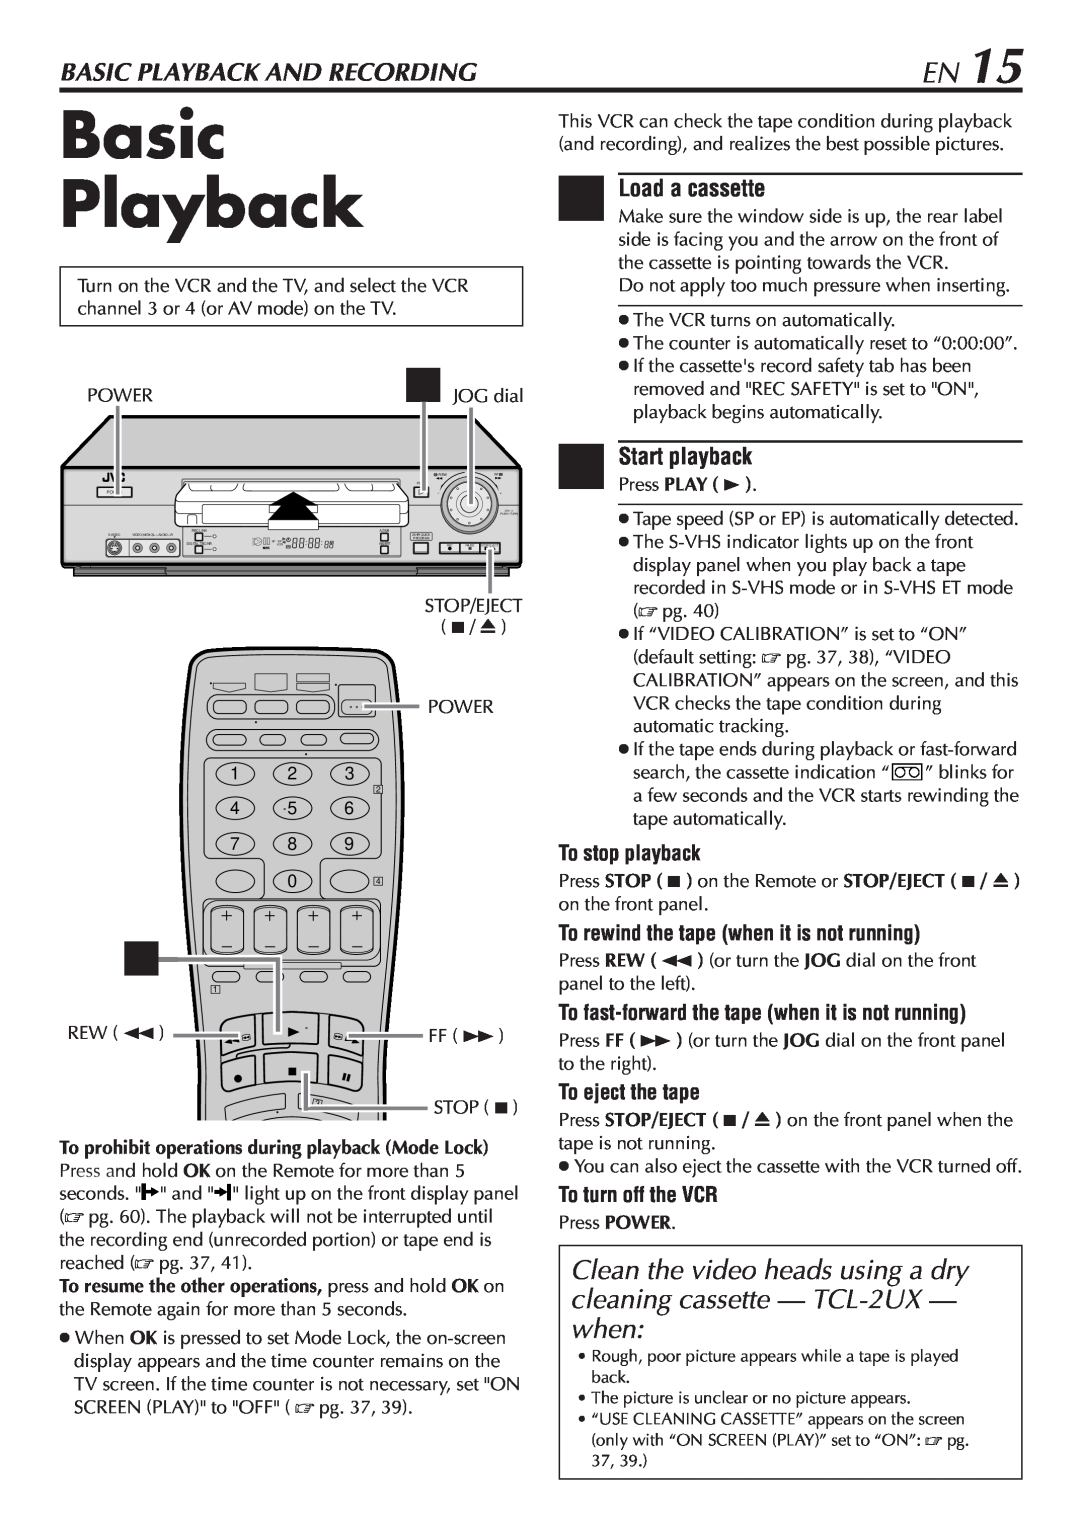 JVC SR-V10U manual Basic Playback And Recording, Load a cassette, 2Start playback, To stop playback, To eject the tape 